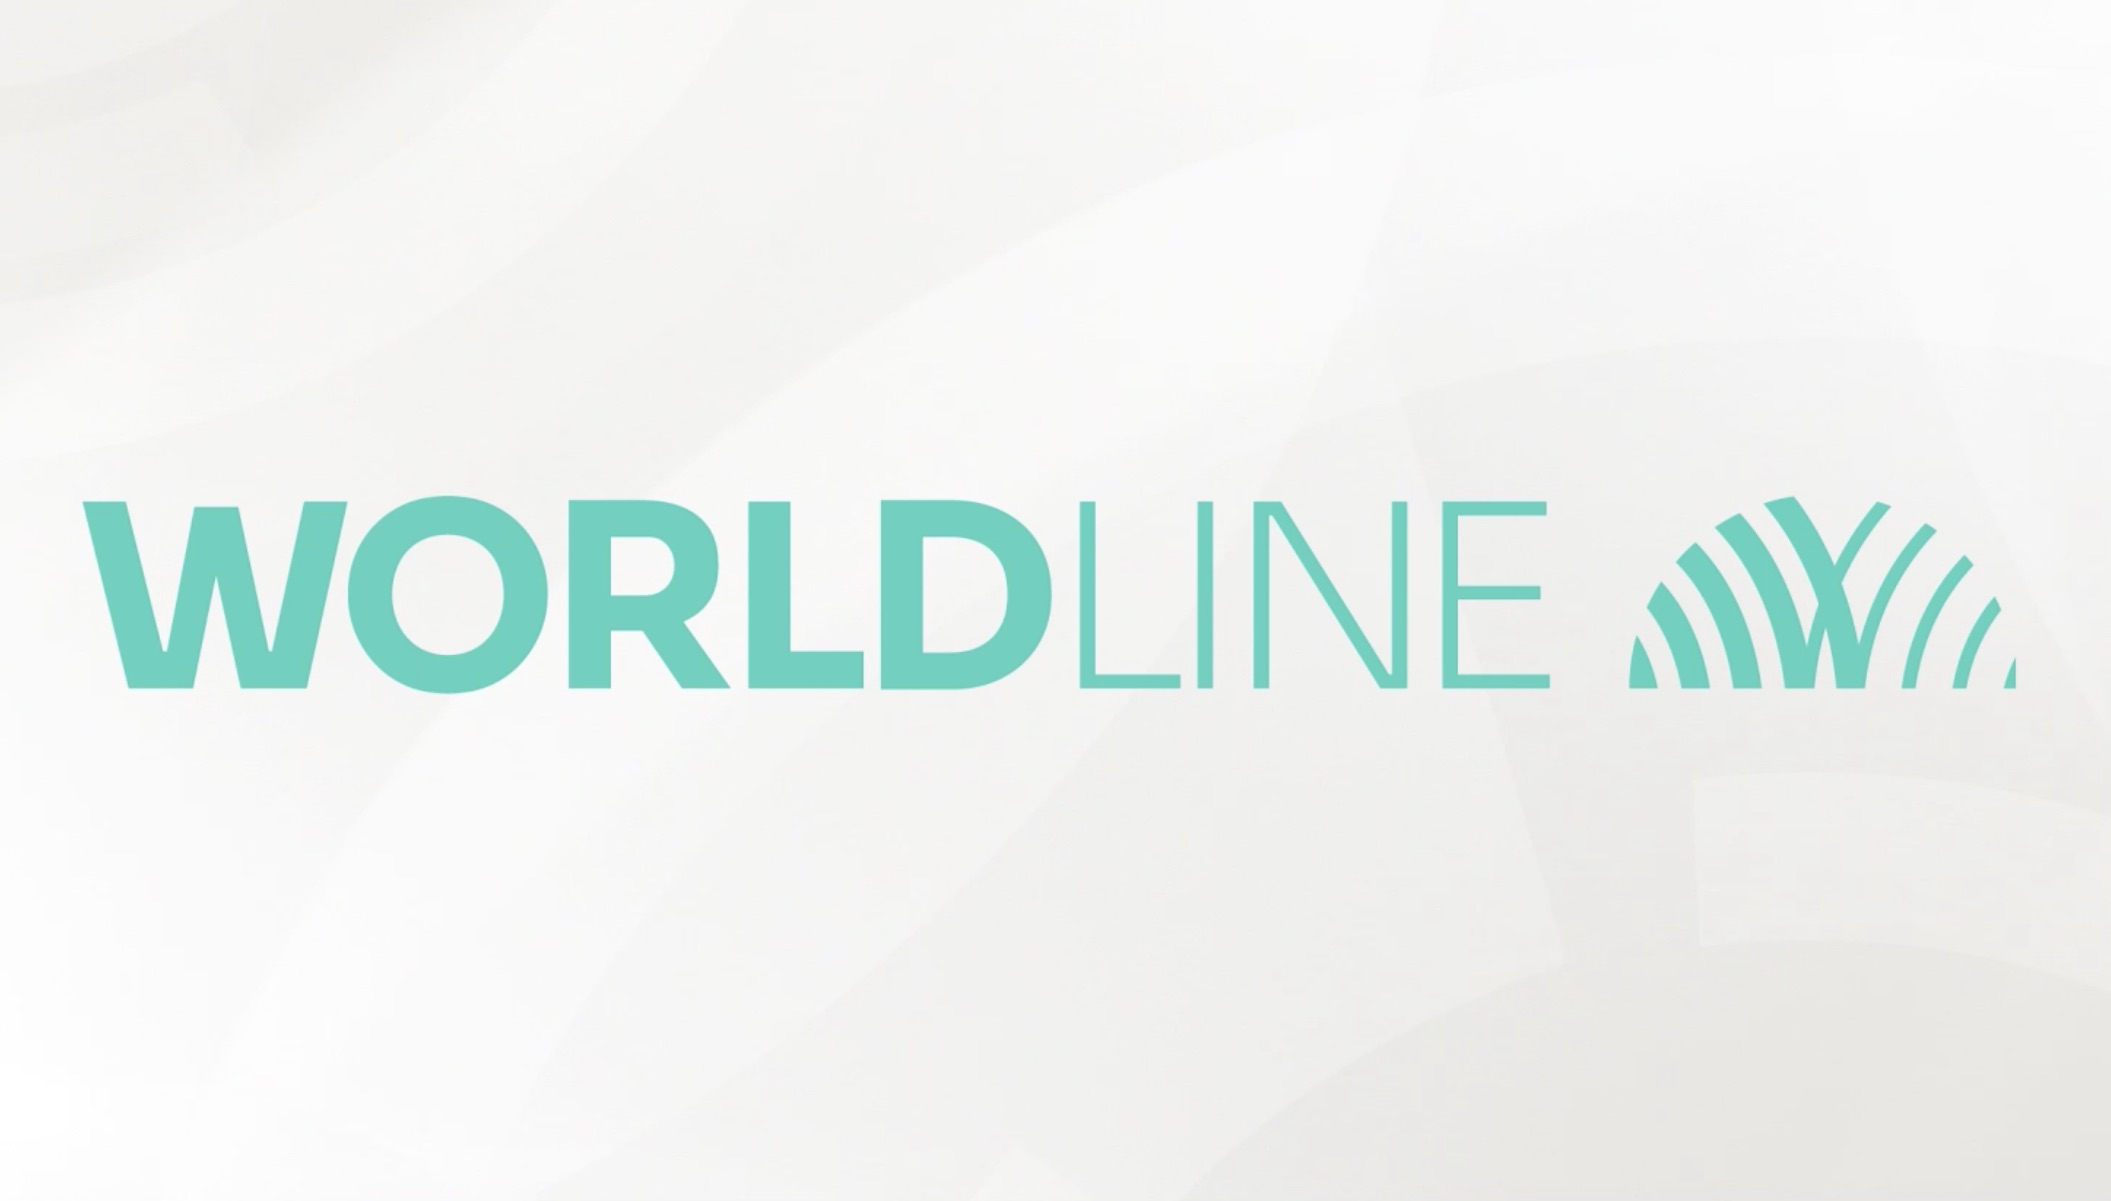 Worldline Named one of The Times Top 50 Employers for Women 2022 in the UK